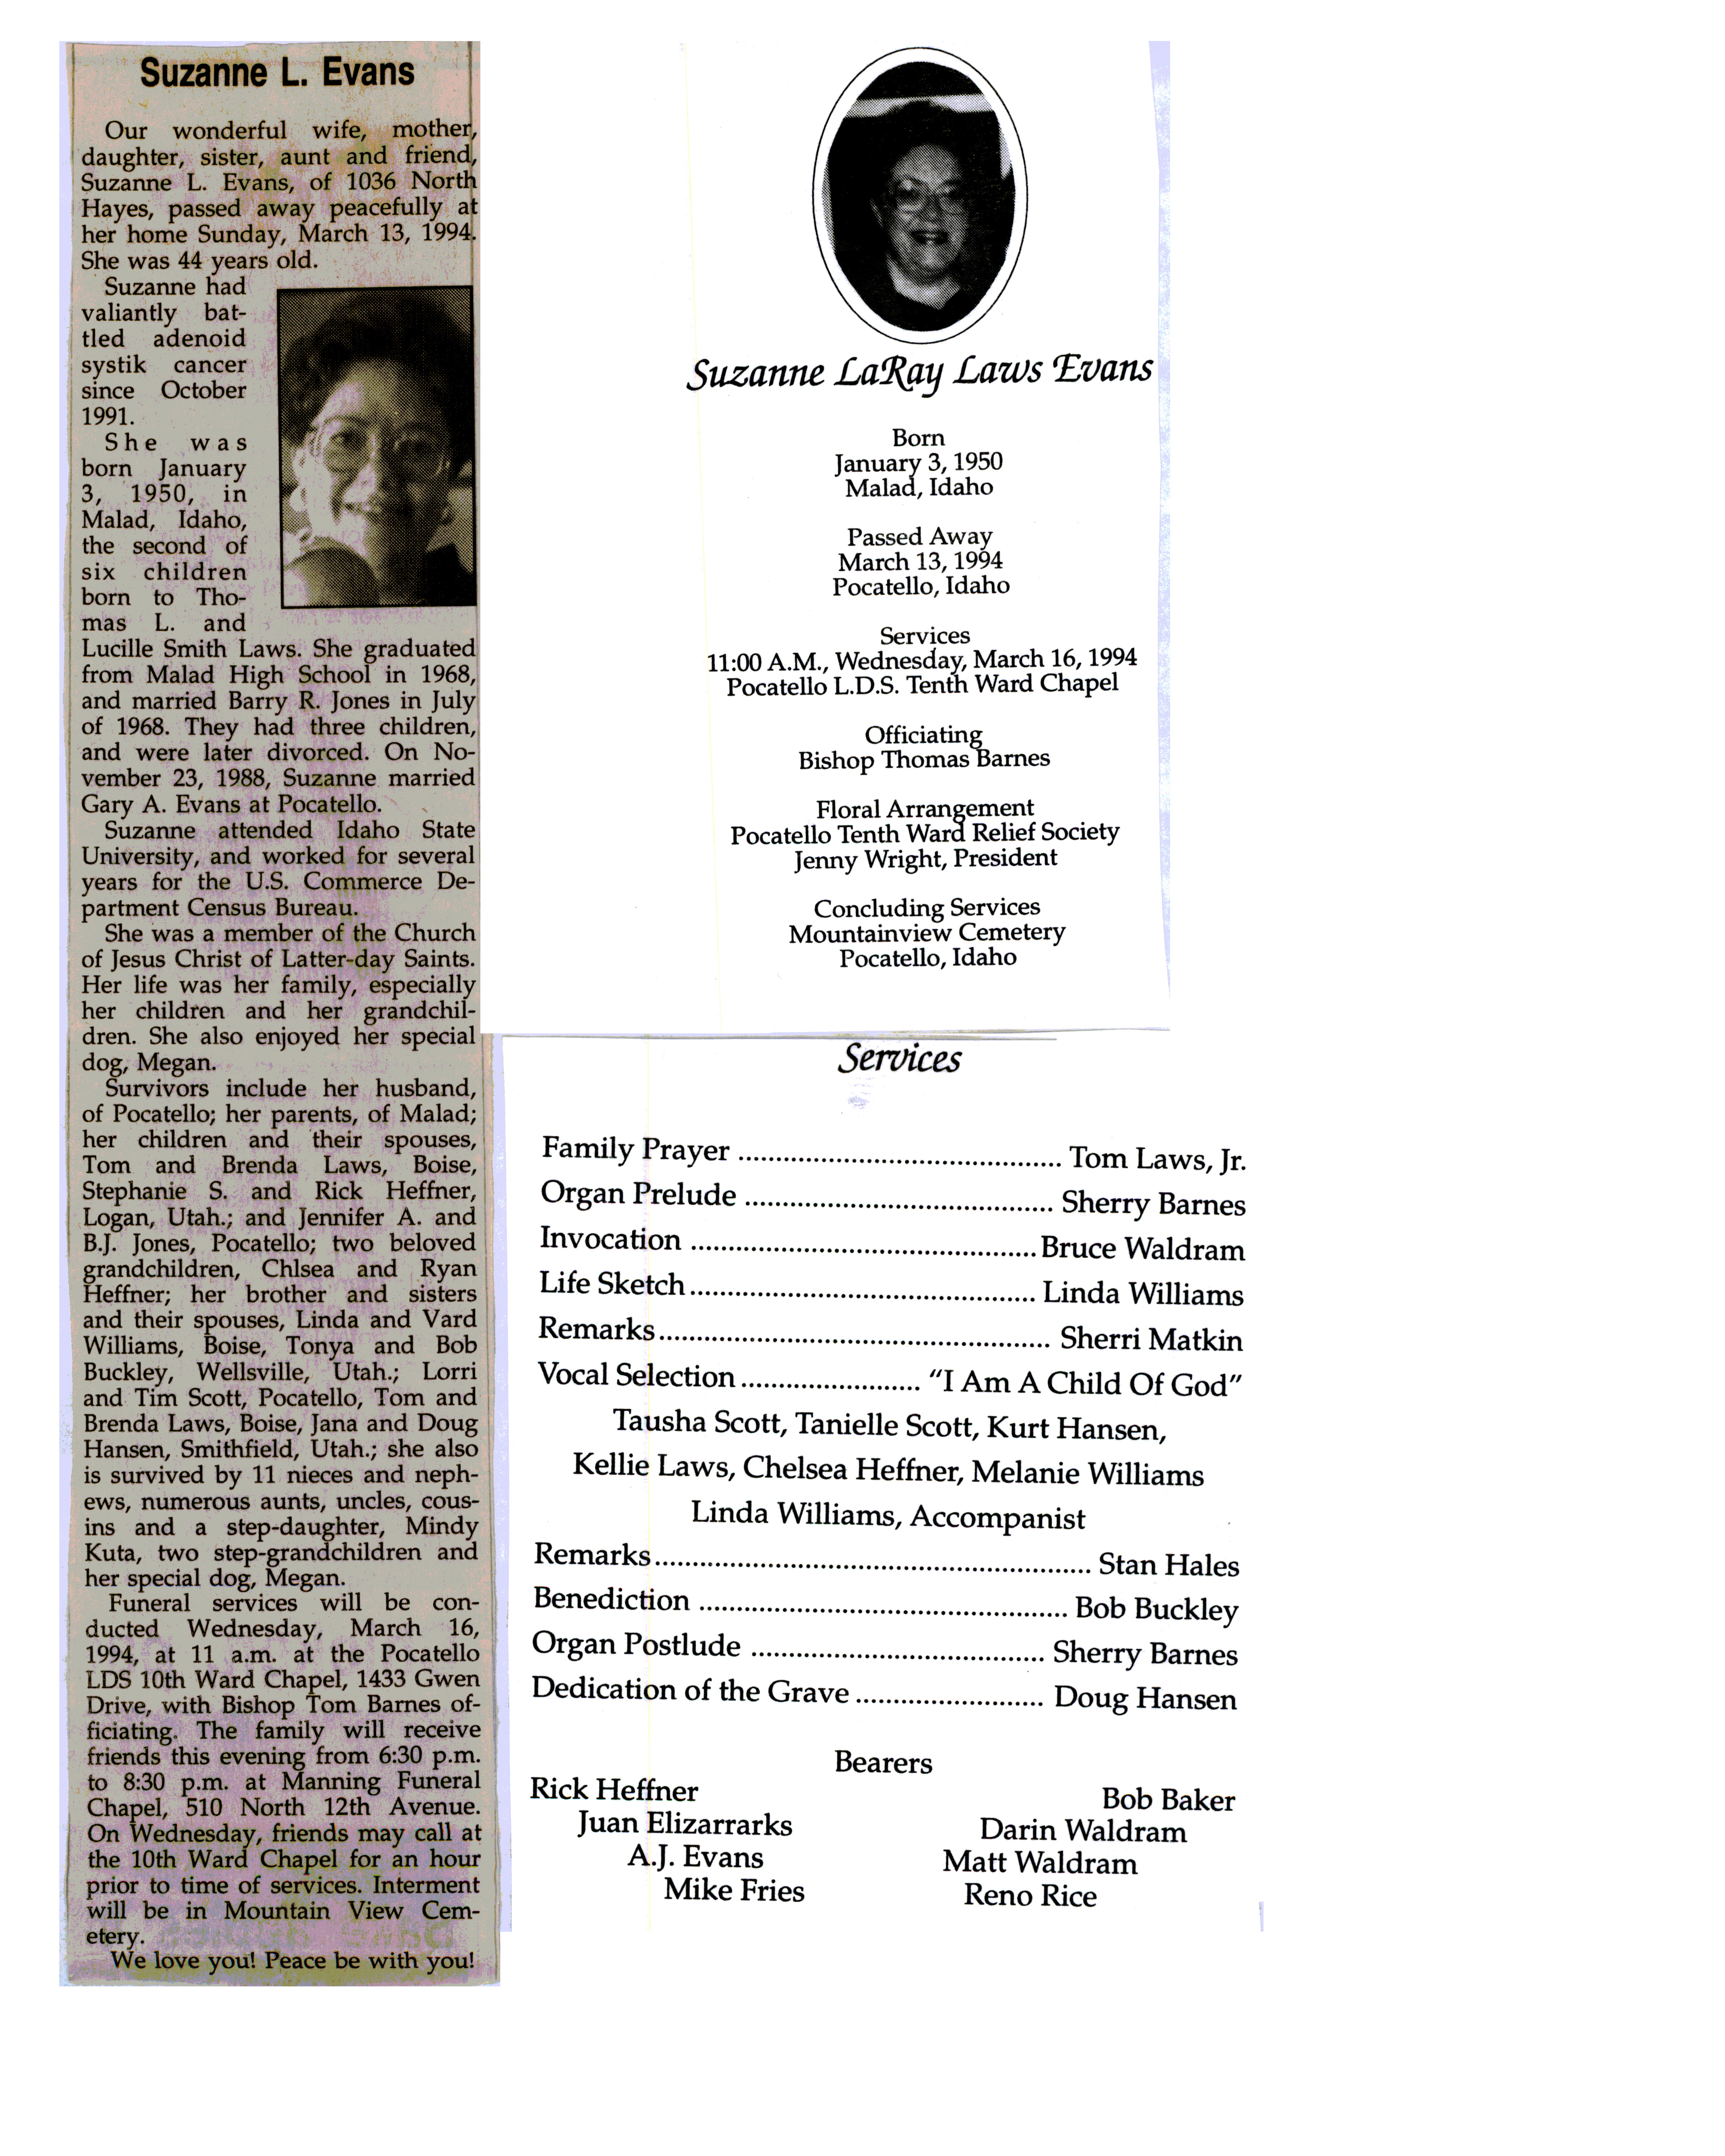 Suzanne LaRay Laws Evans obit and program